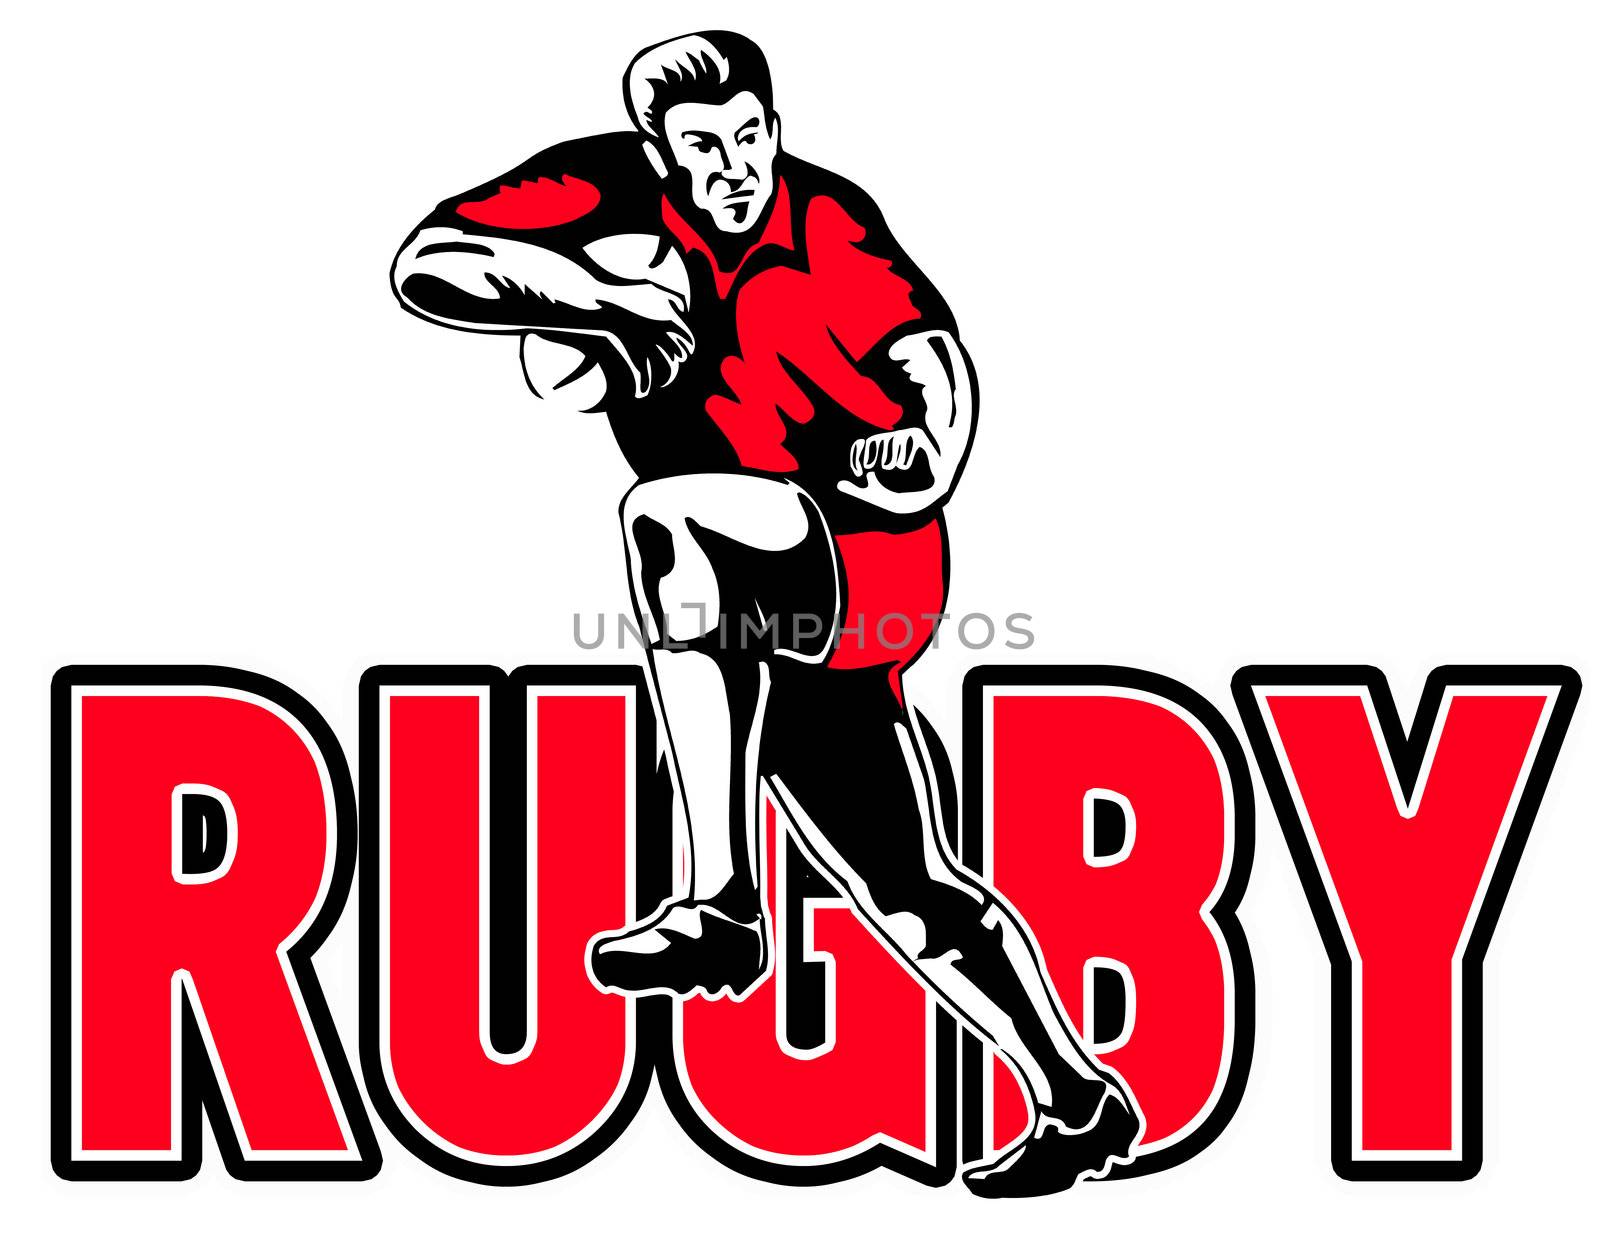 retro style illustration of a Rugby player running with ball and fending off on white background